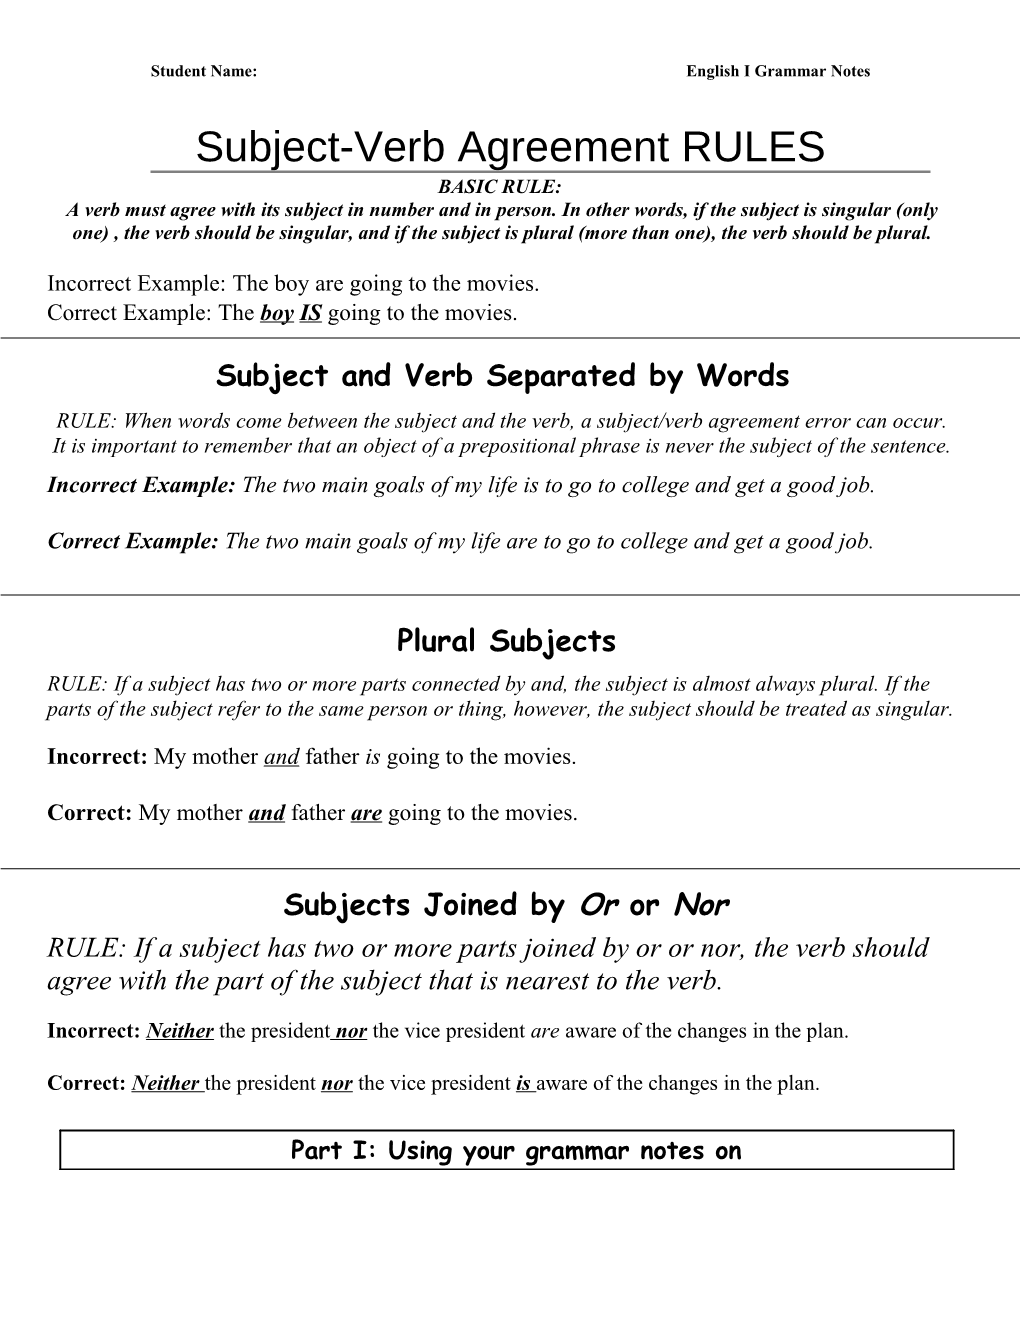 Subject Verb Rules And Practice